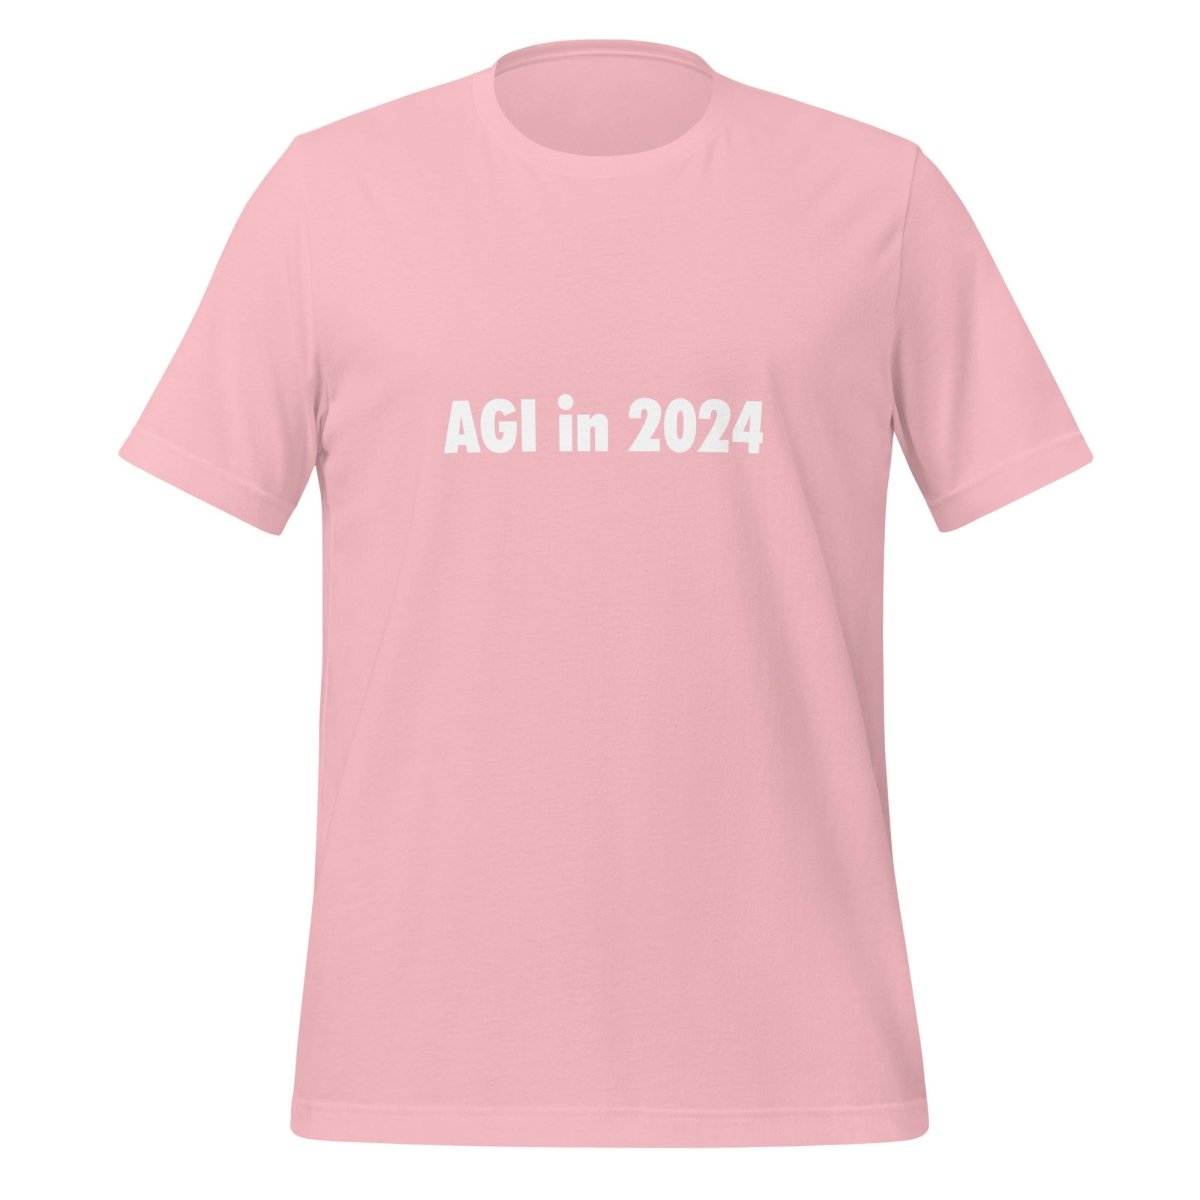 AGI in 2024 T - Shirt (unisex) - Pink - AI Store